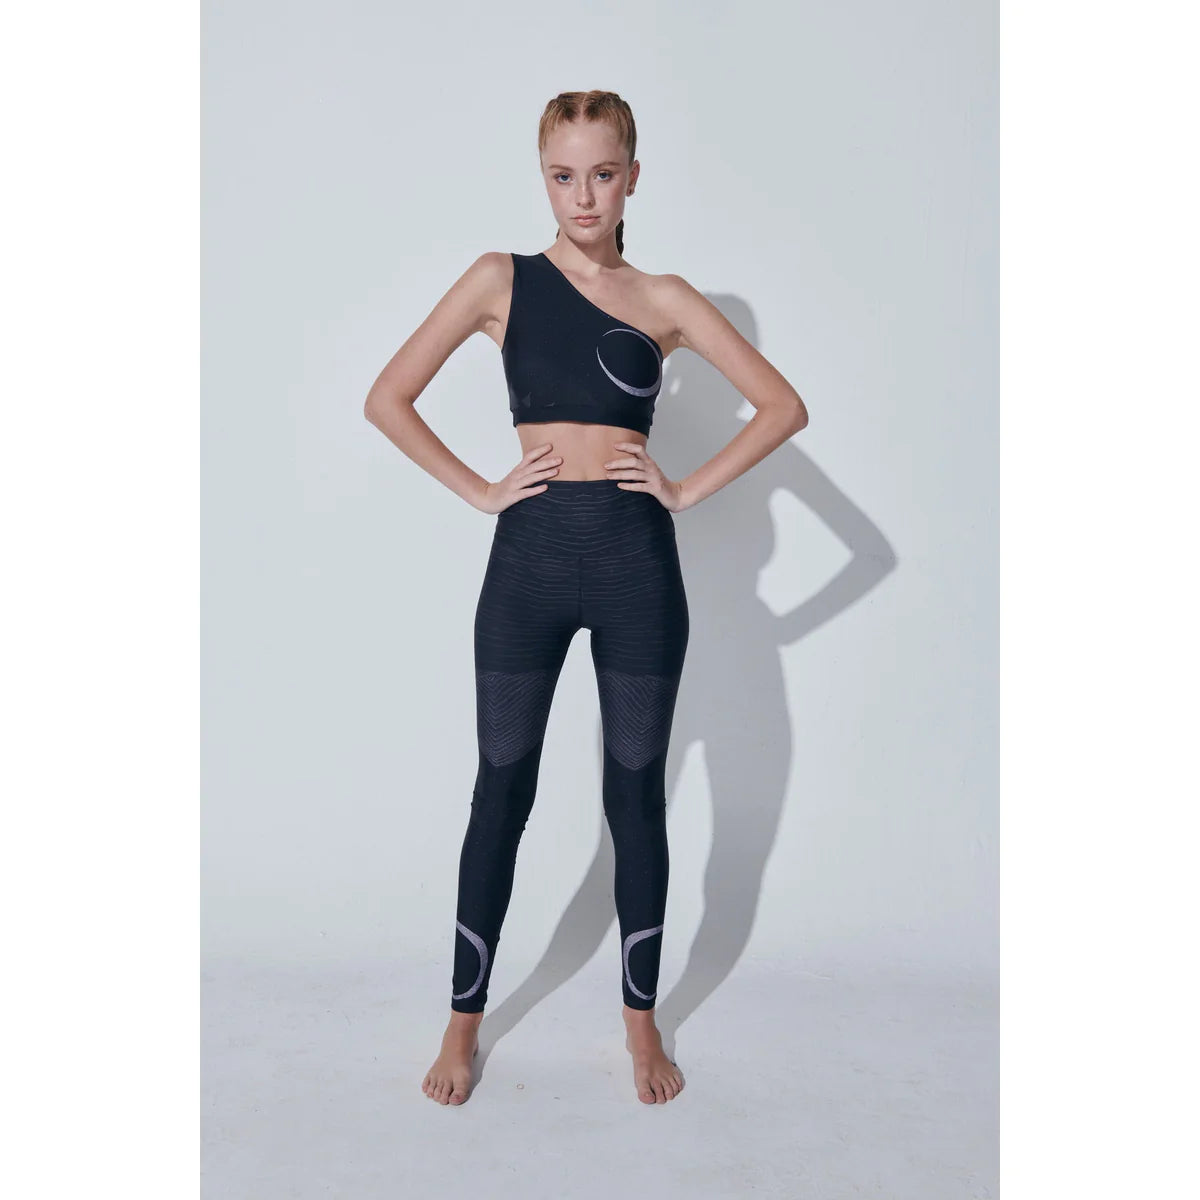 Exercise in style with wide-leg yoga pants – Onpost